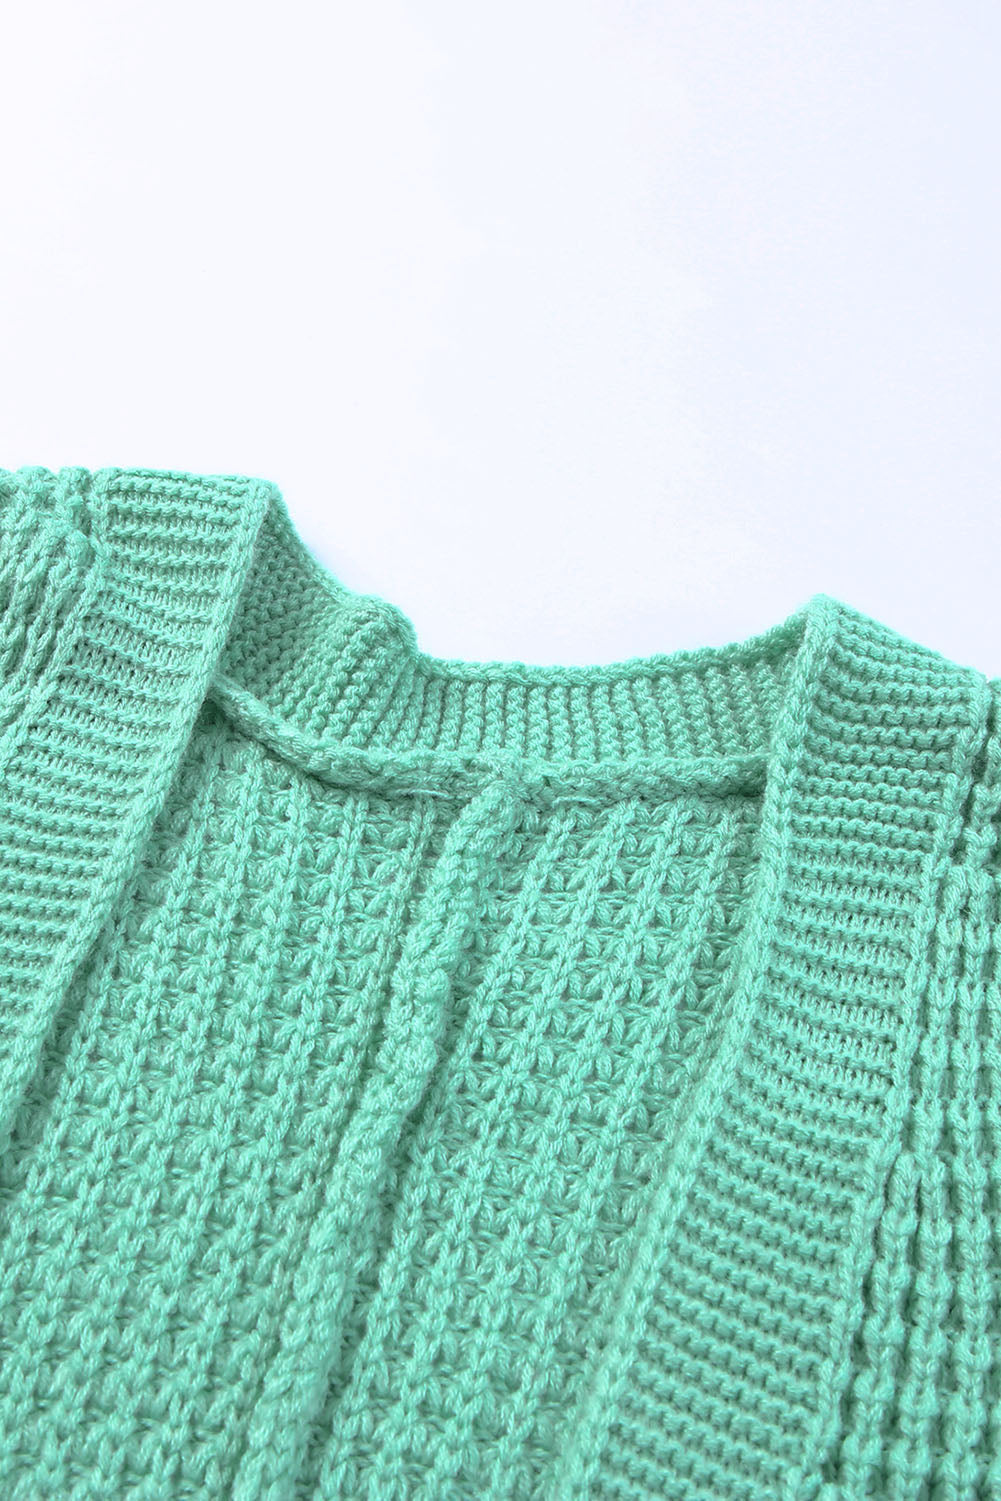 Green Long Line Open Front Knitted Cardigan with Pockets Sweaters & Cardigans JT's Designer Fashion